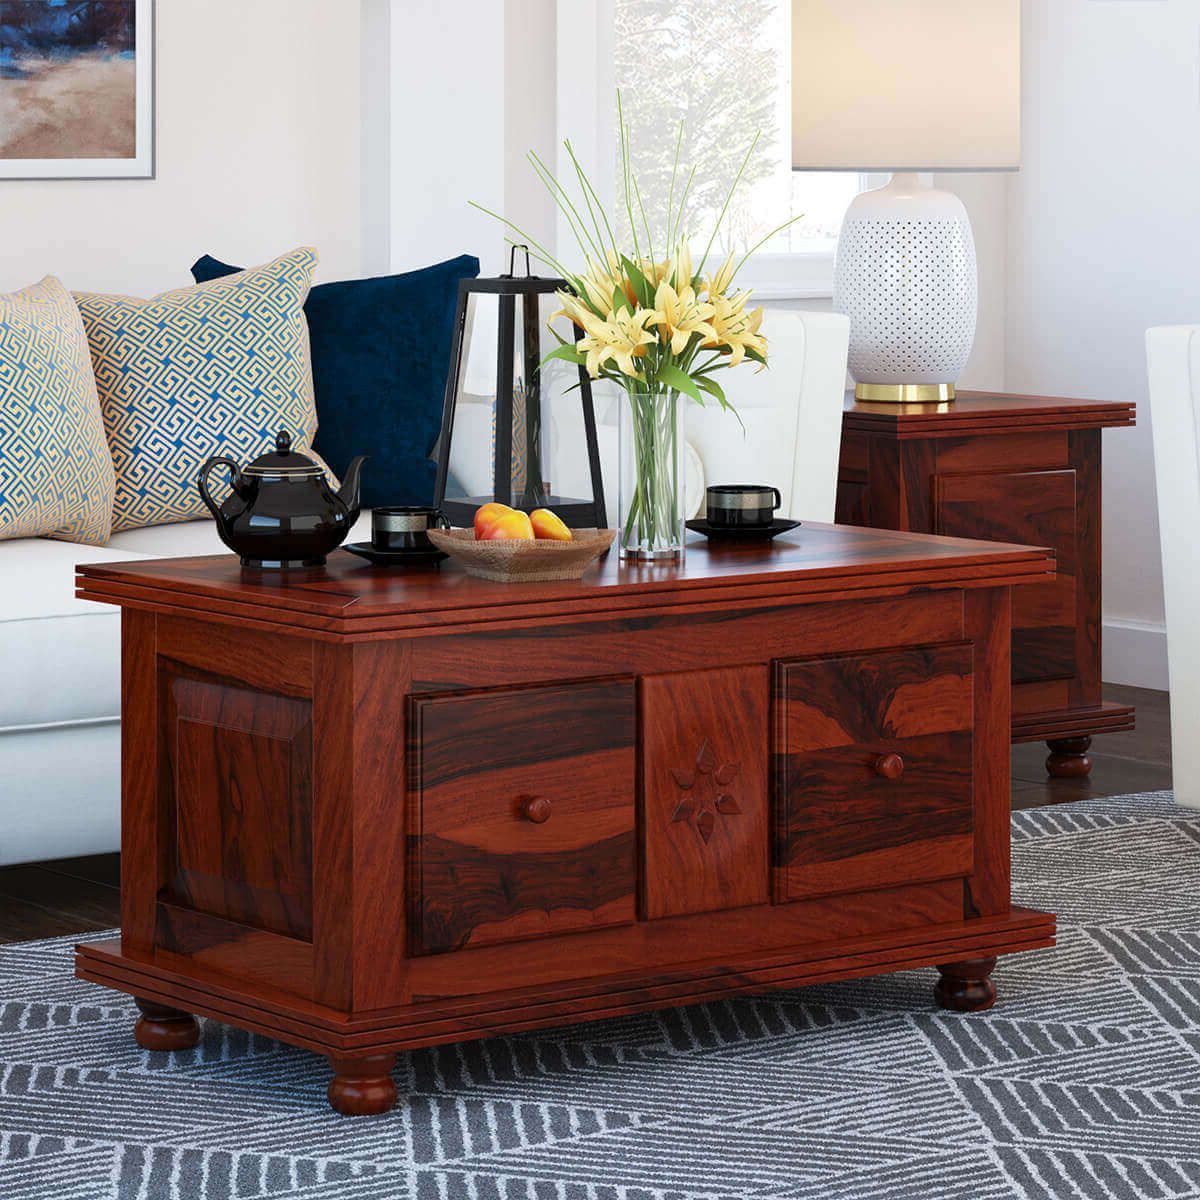 2 Drawer Cocktail Tables Throughout 2019 Arca Rustic Solid Wood 2 Drawer Storage Cocktail Coffee Table (View 3 of 20)